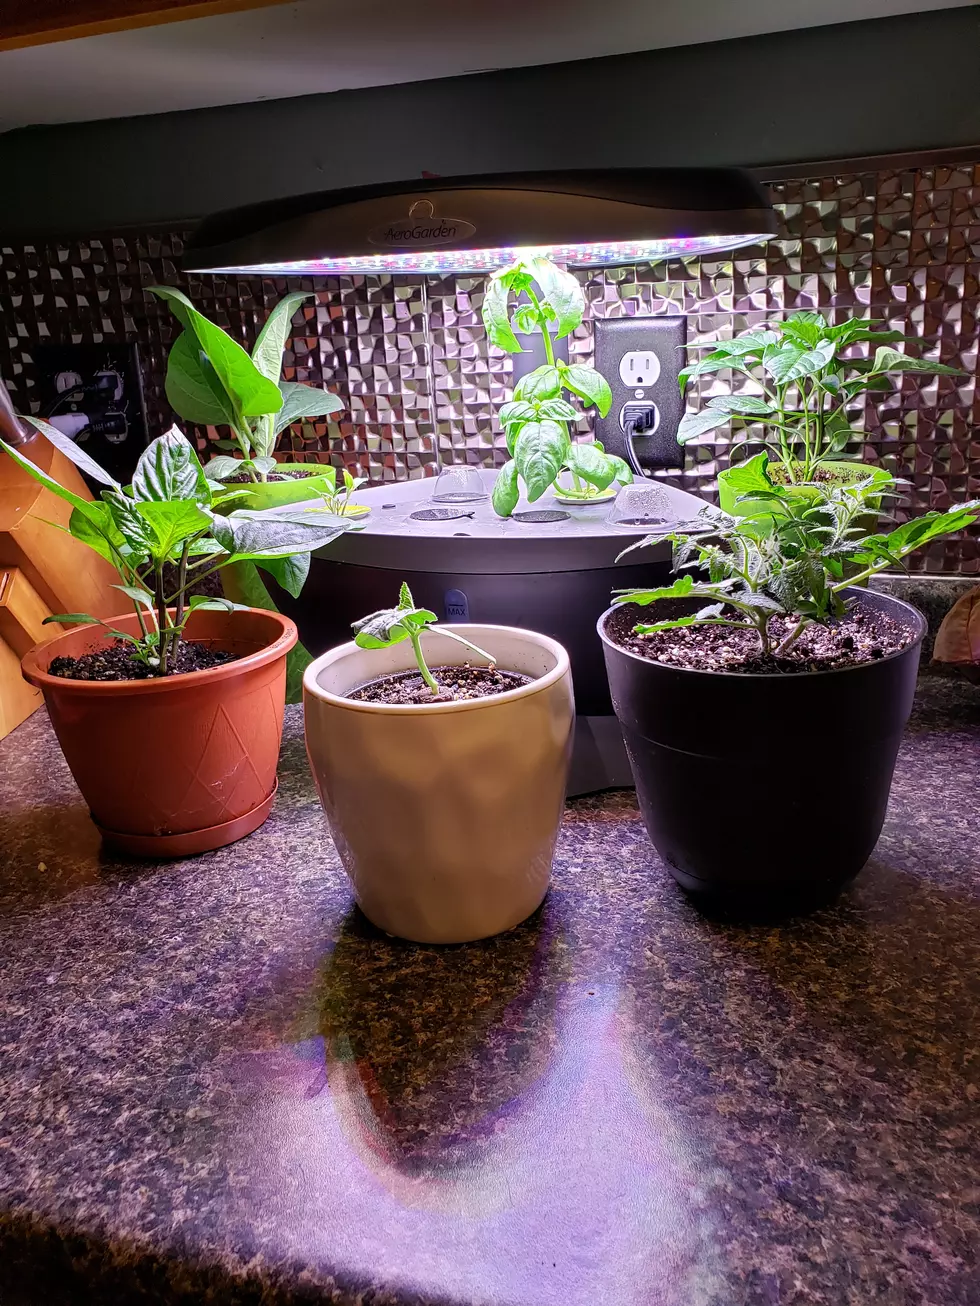 We Decided To Plant An Indoor Garden, And It’s Looking Good